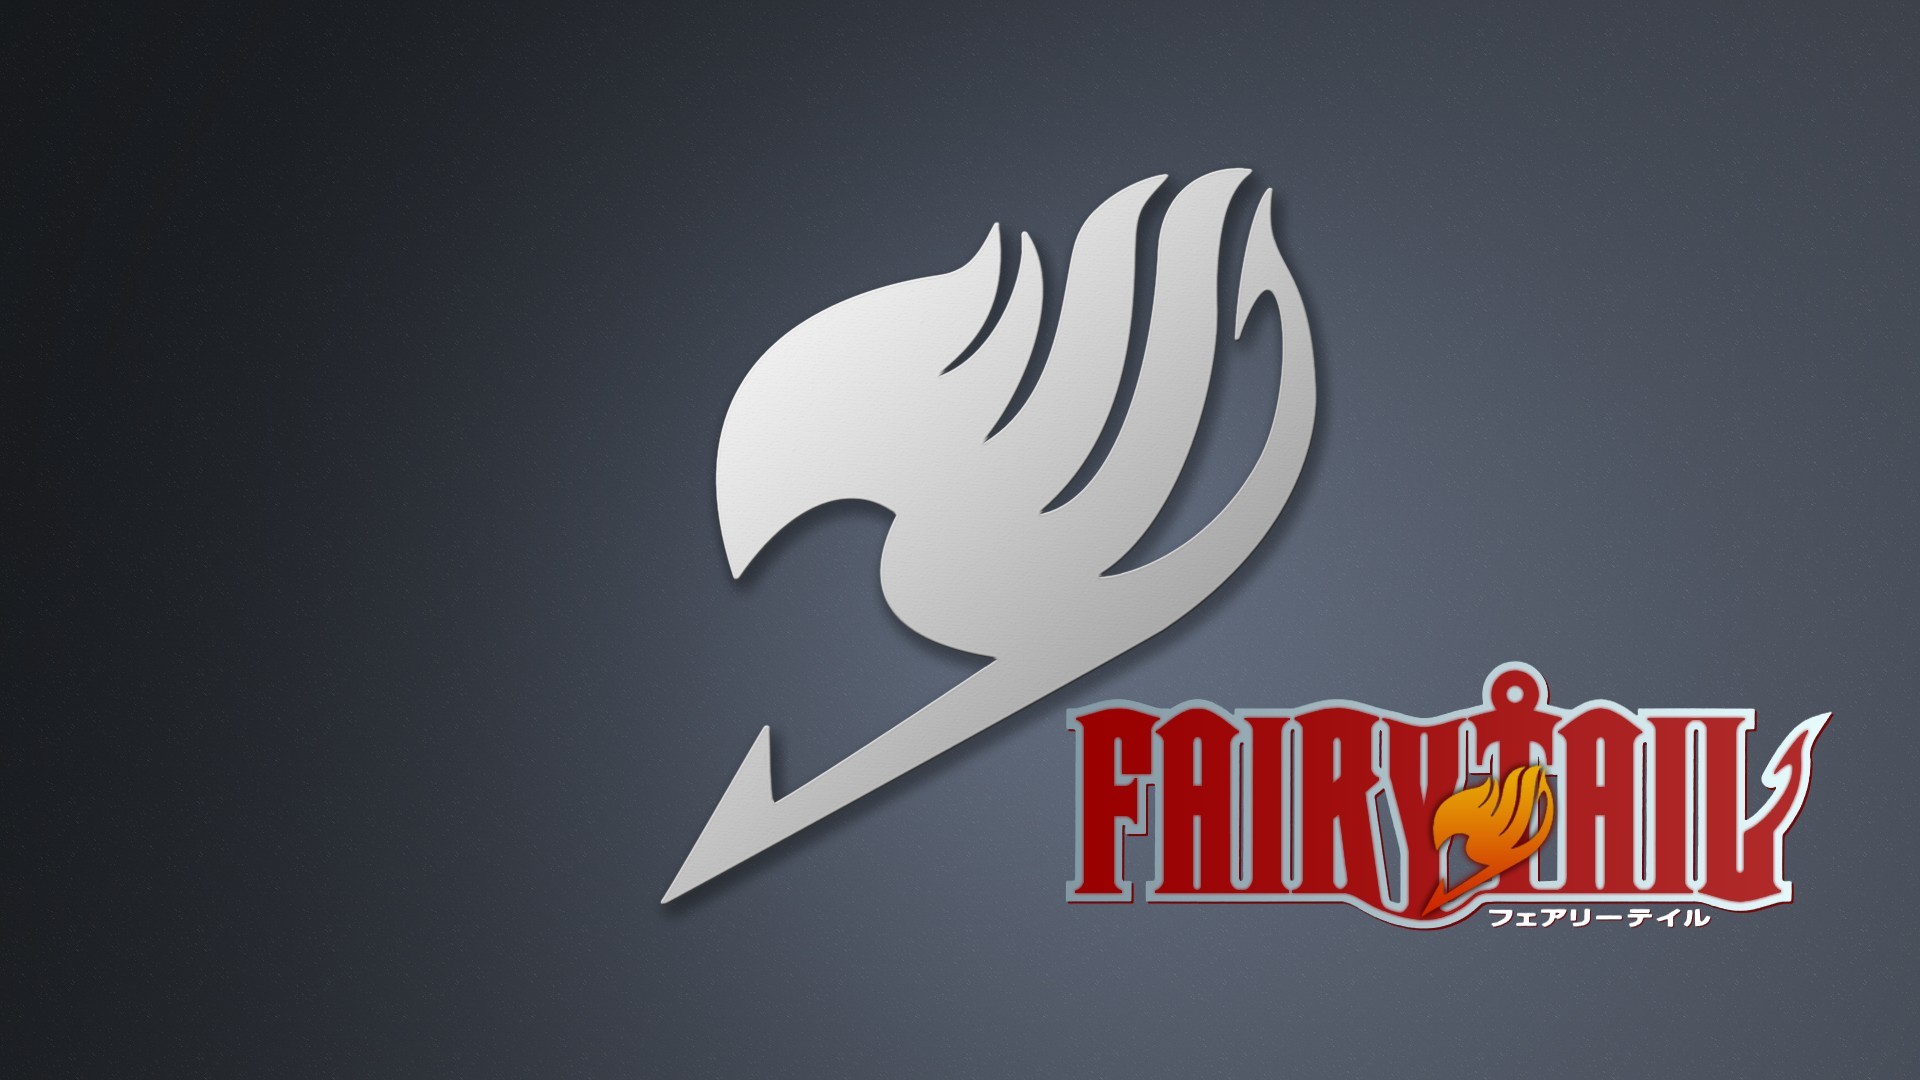 1920x1080 FAIRY TAIL Â· download FAIRY TAIL image